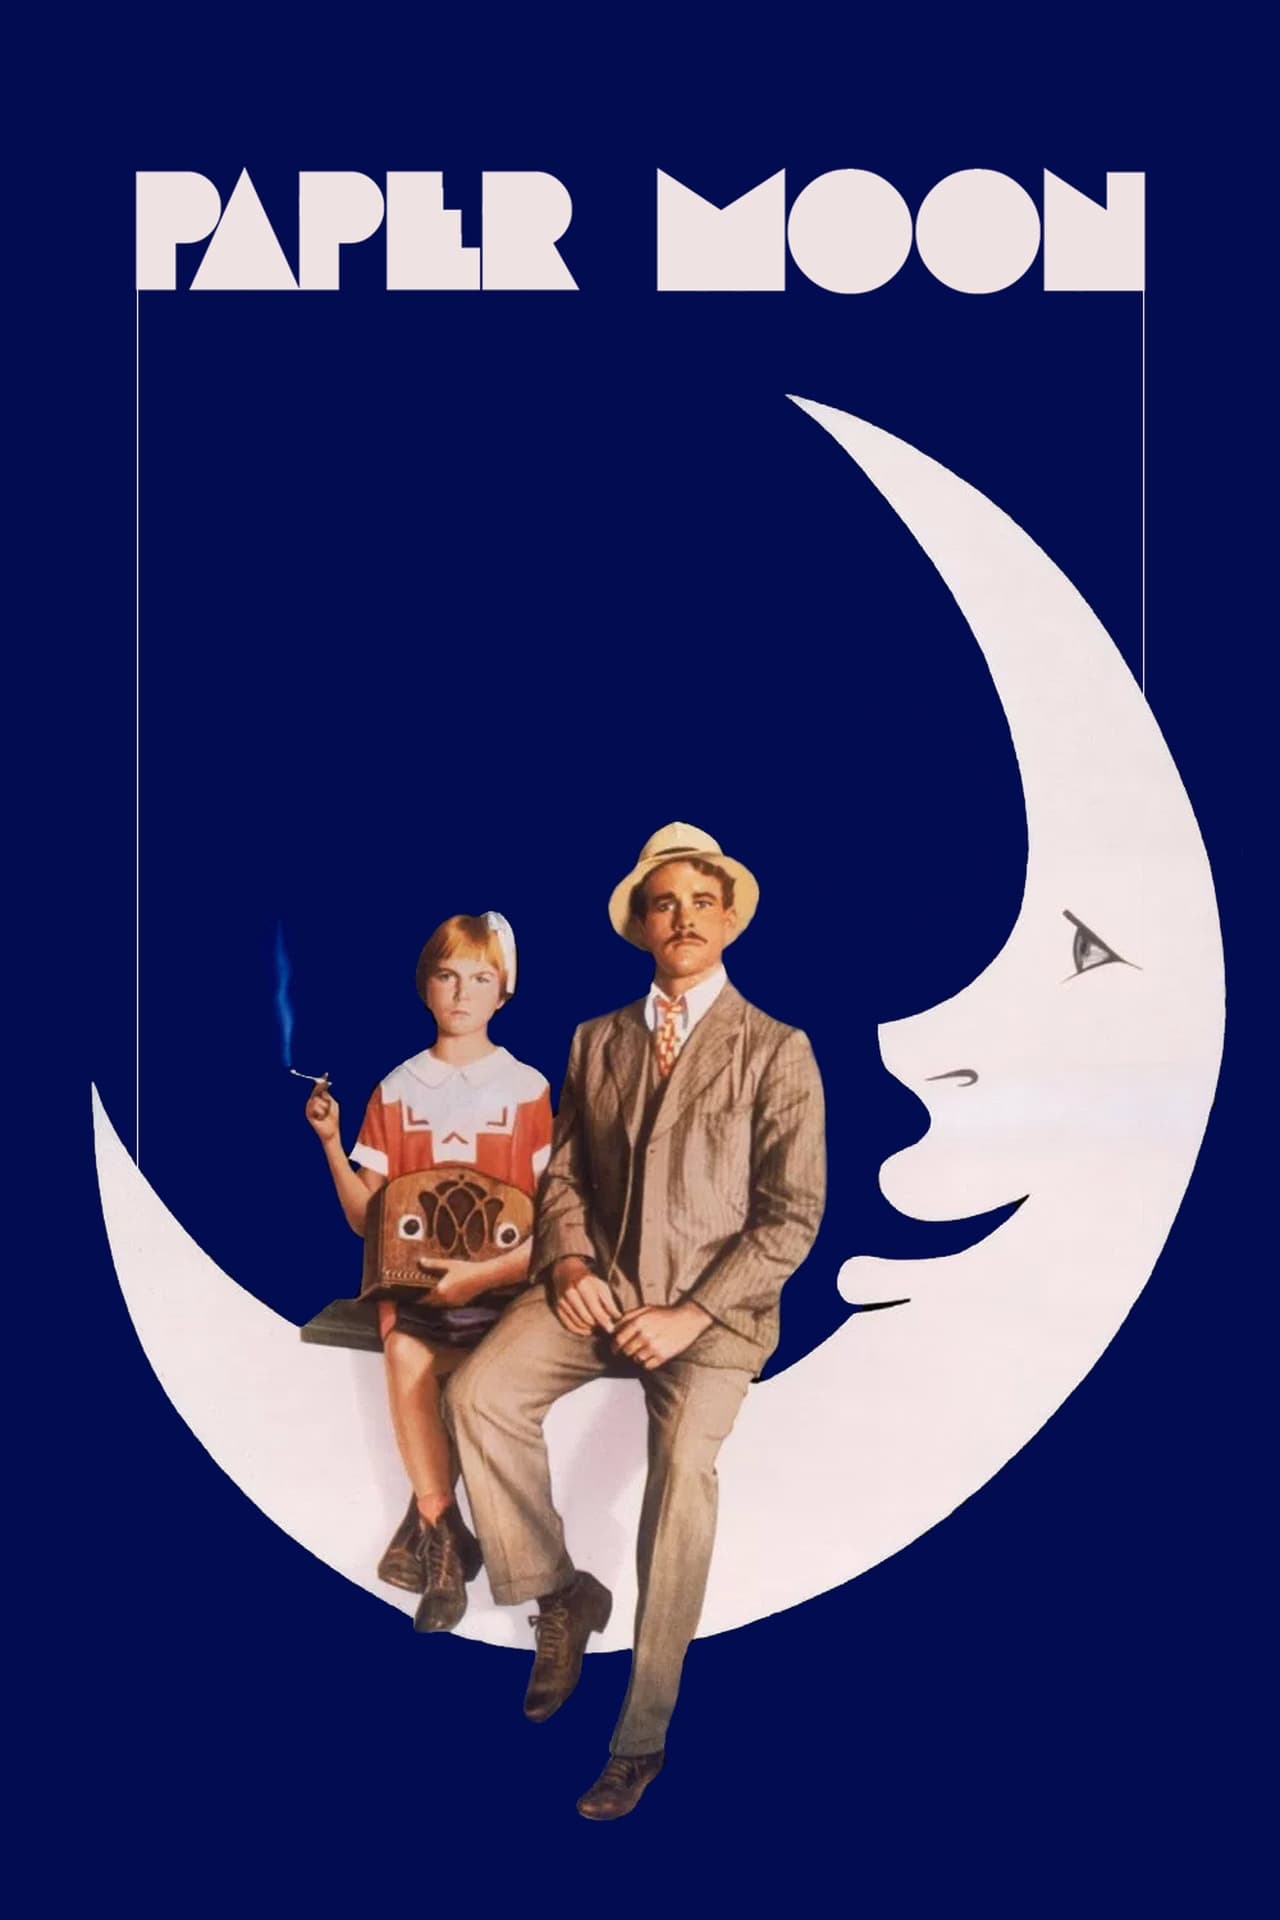 Paper Moon wiki, synopsis, reviews, watch and download